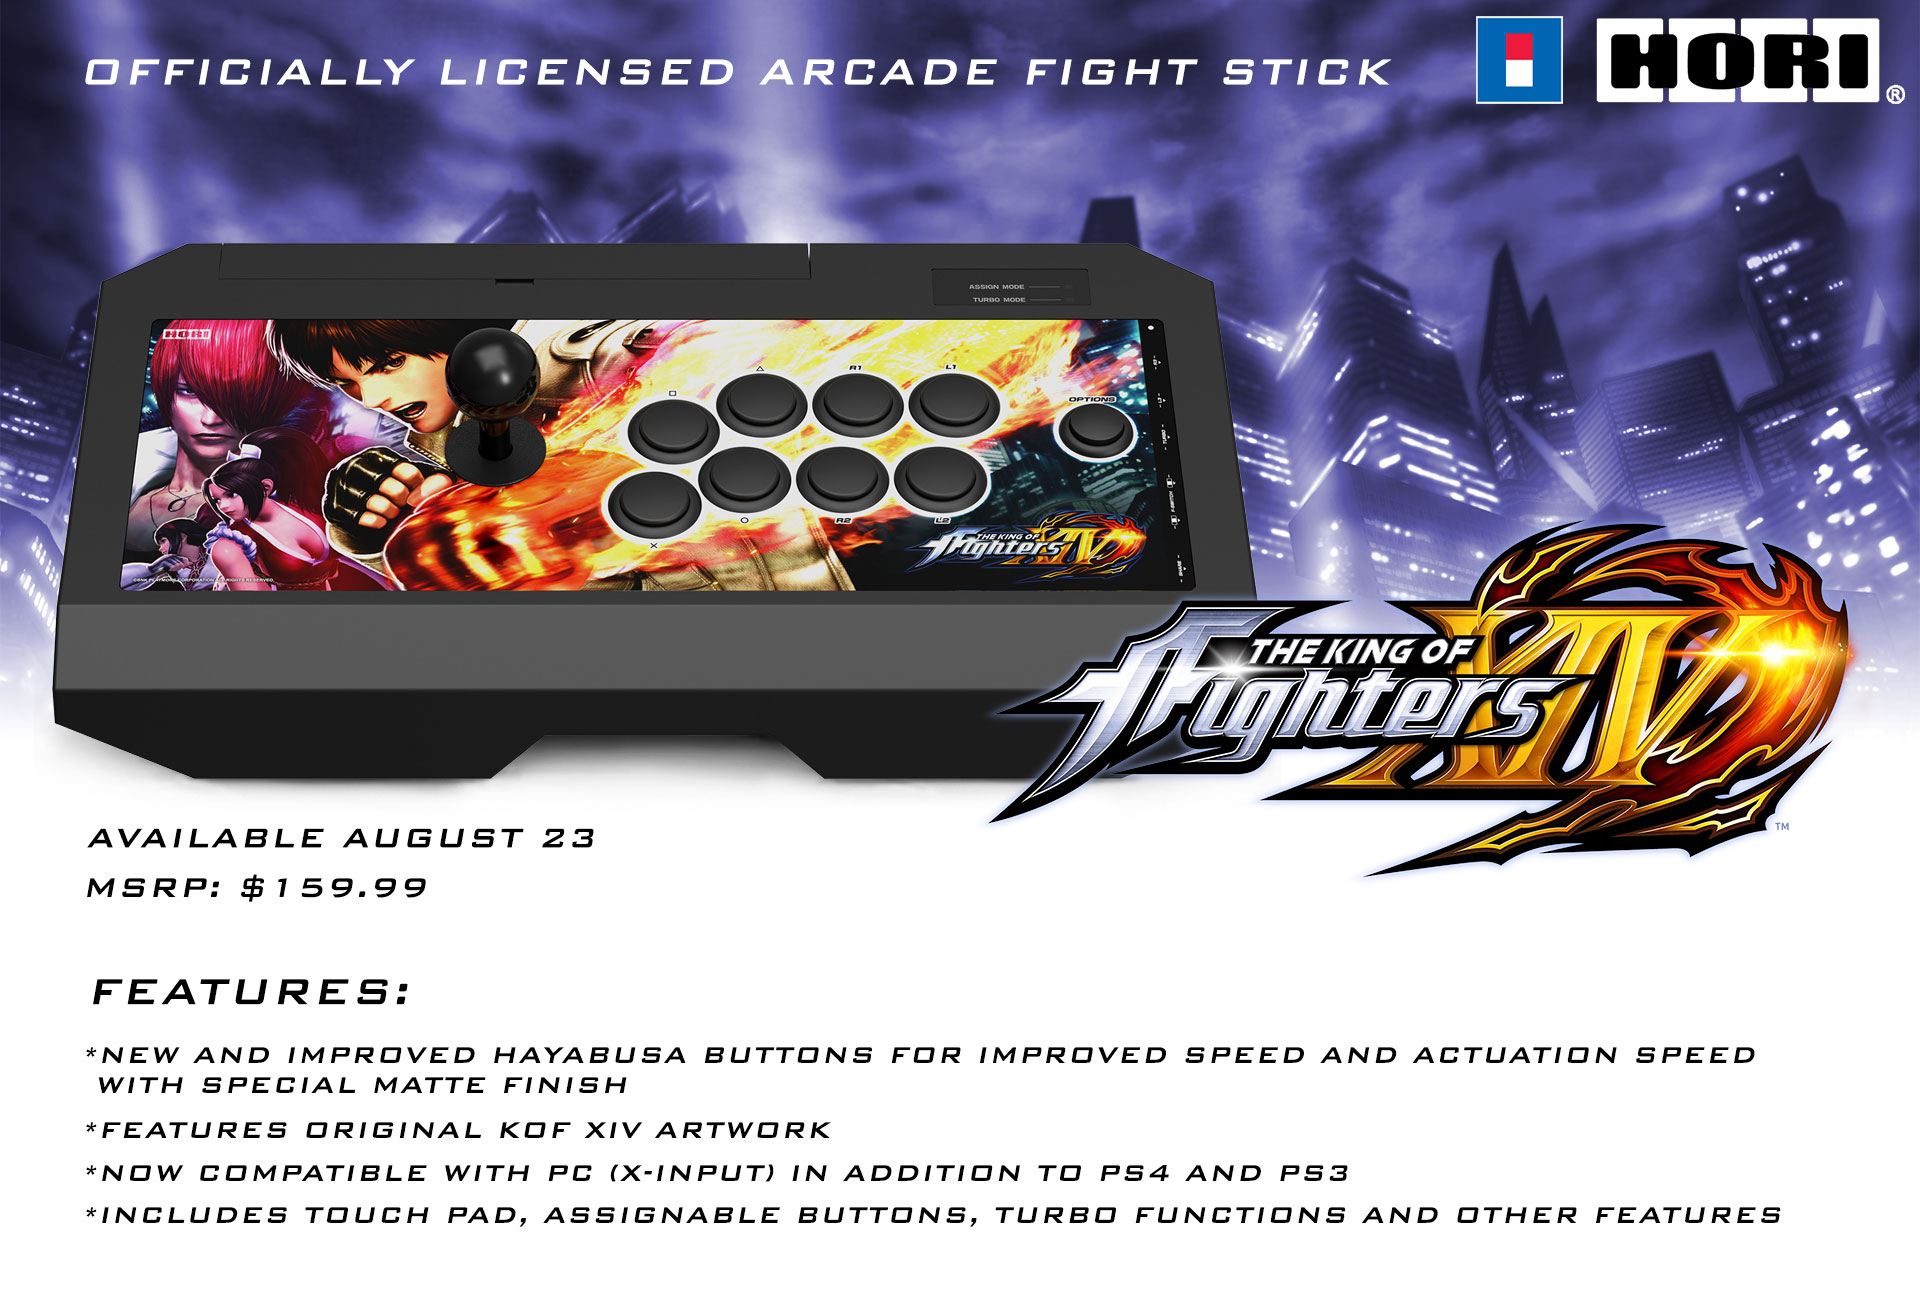 Officially licensed The King of Fighters XIV Arcade Fightstick